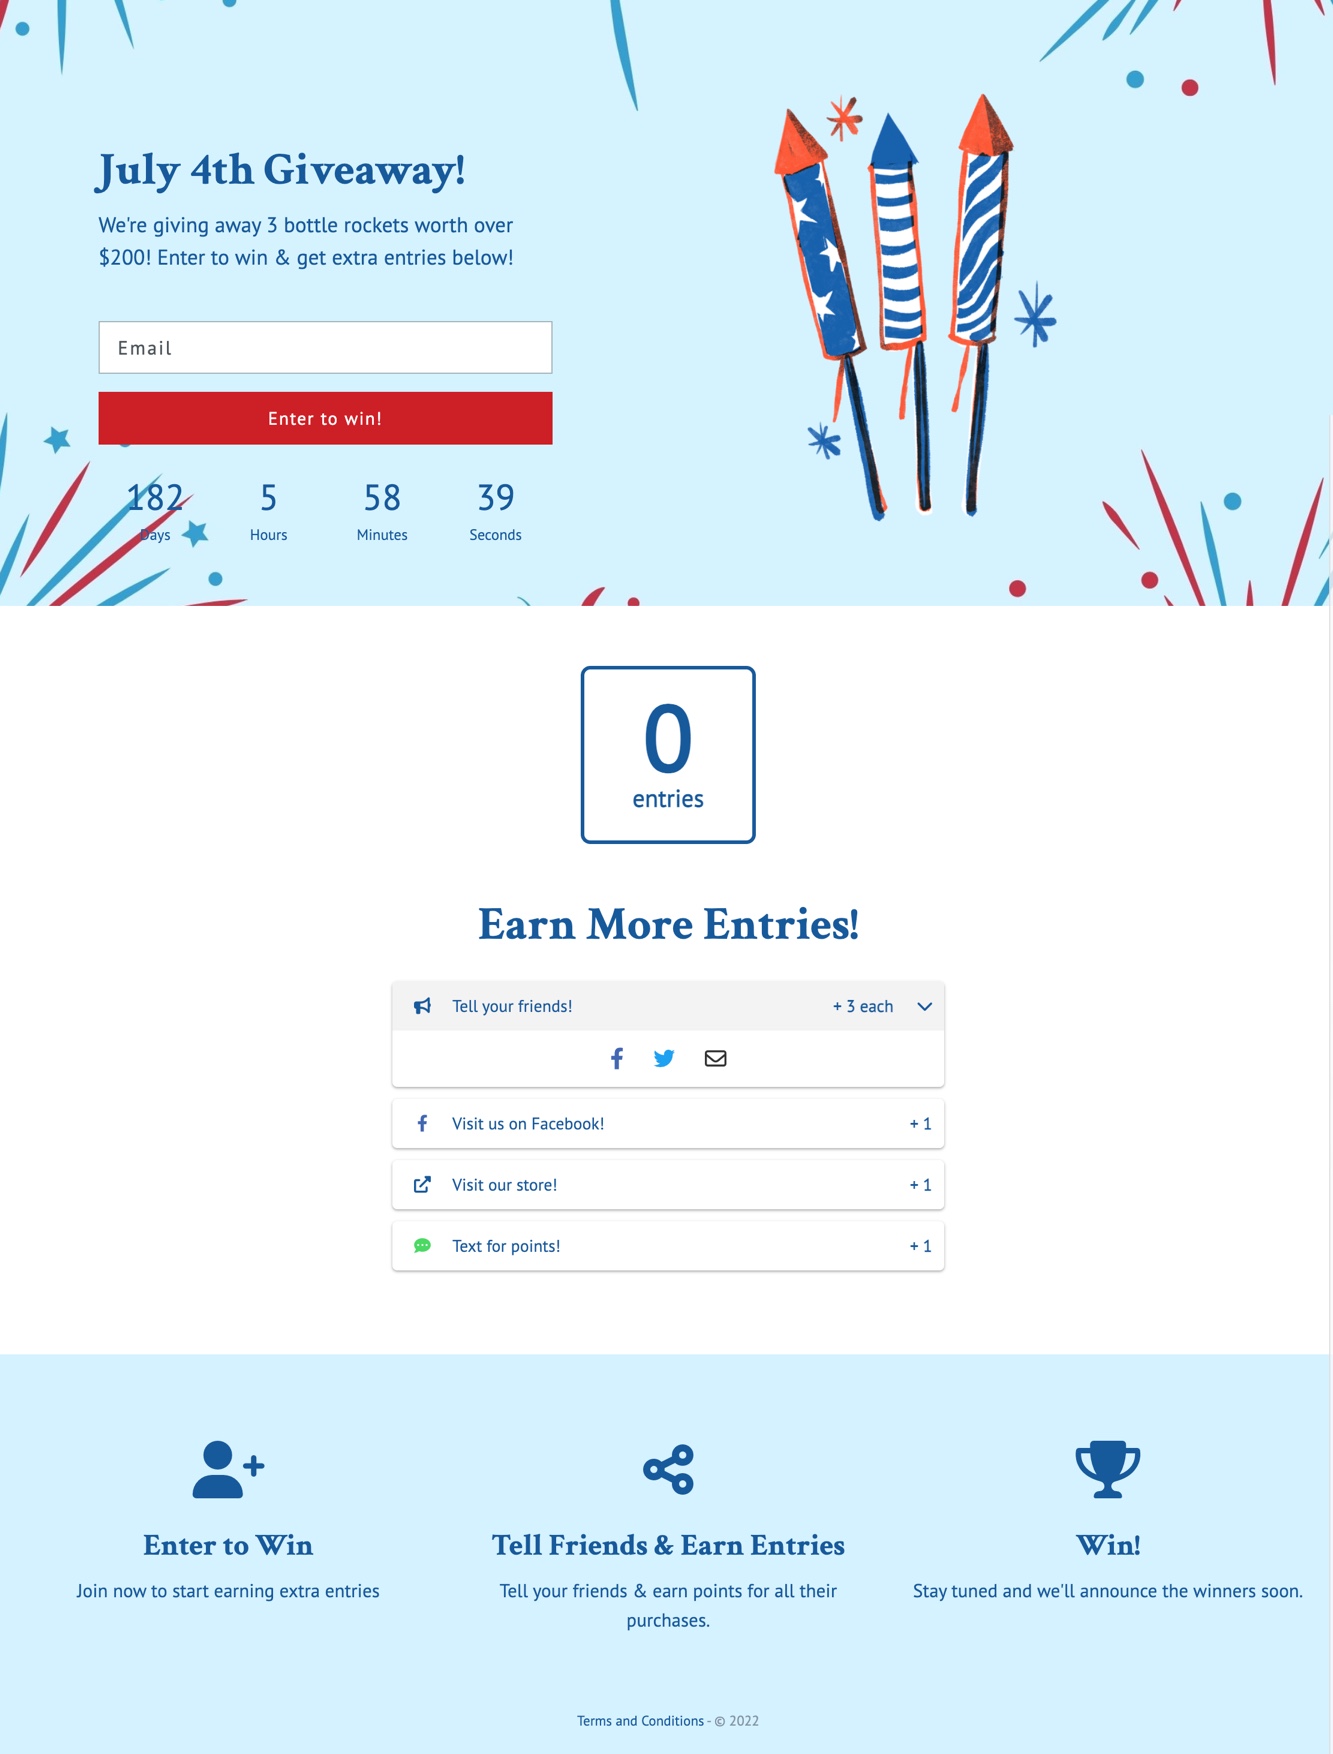 Landing Page Template: Enter to Win: July 4th Sweepstakes